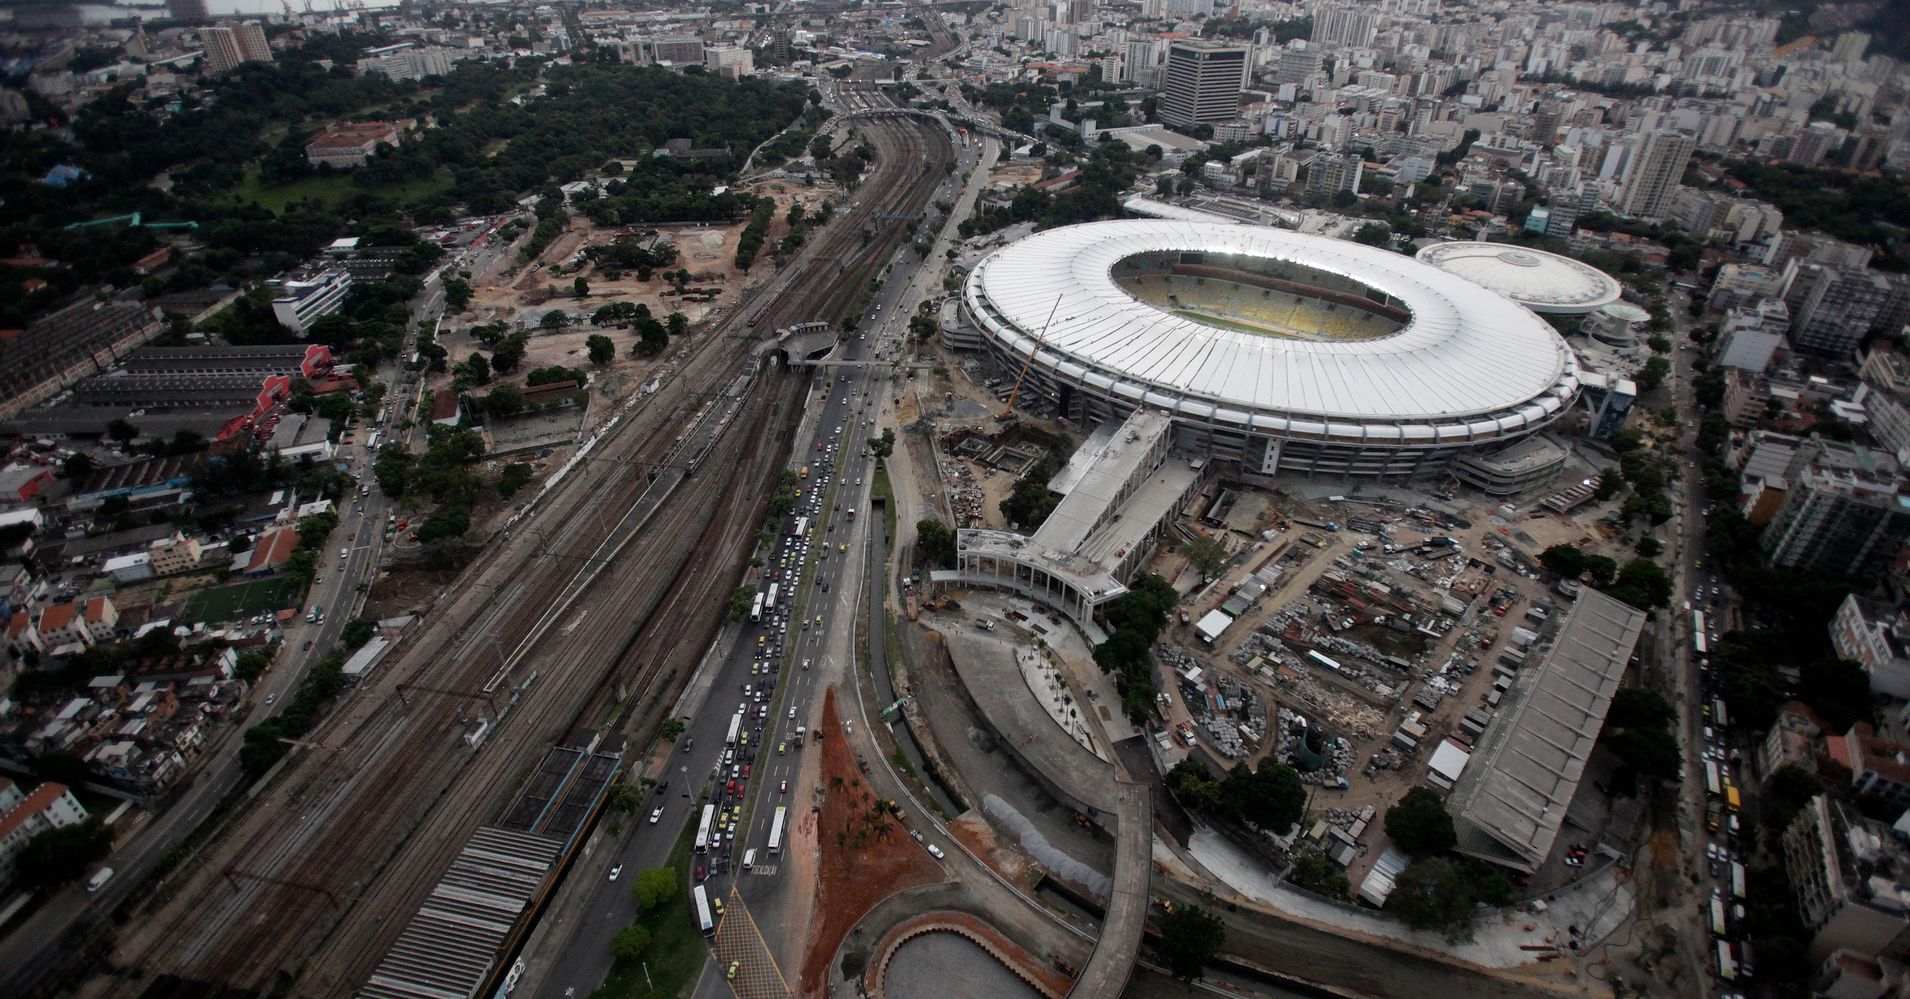 Are The Rio Games Showing Brazil As An Emerging Power? HuffPost